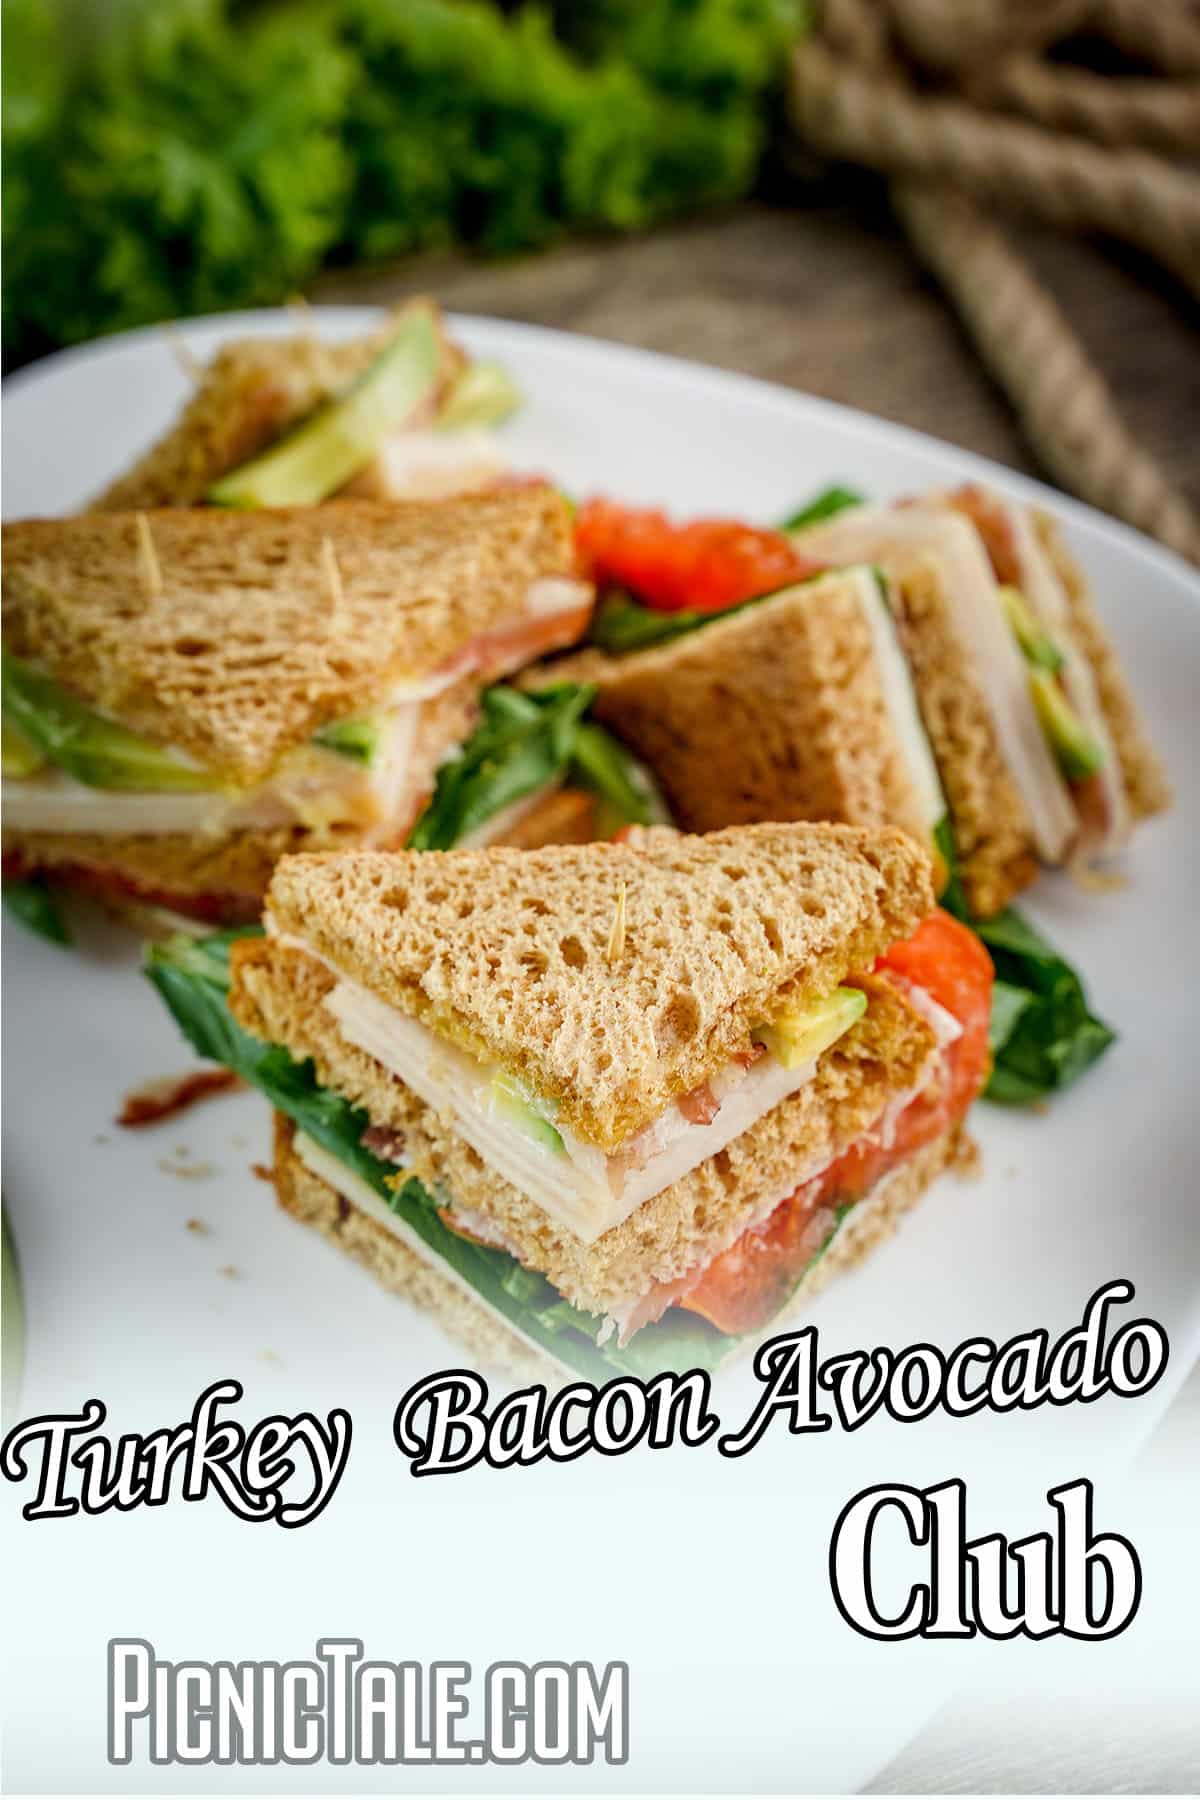 easy picnic sandwich with text which reads Turkey Bacon Avocado Club